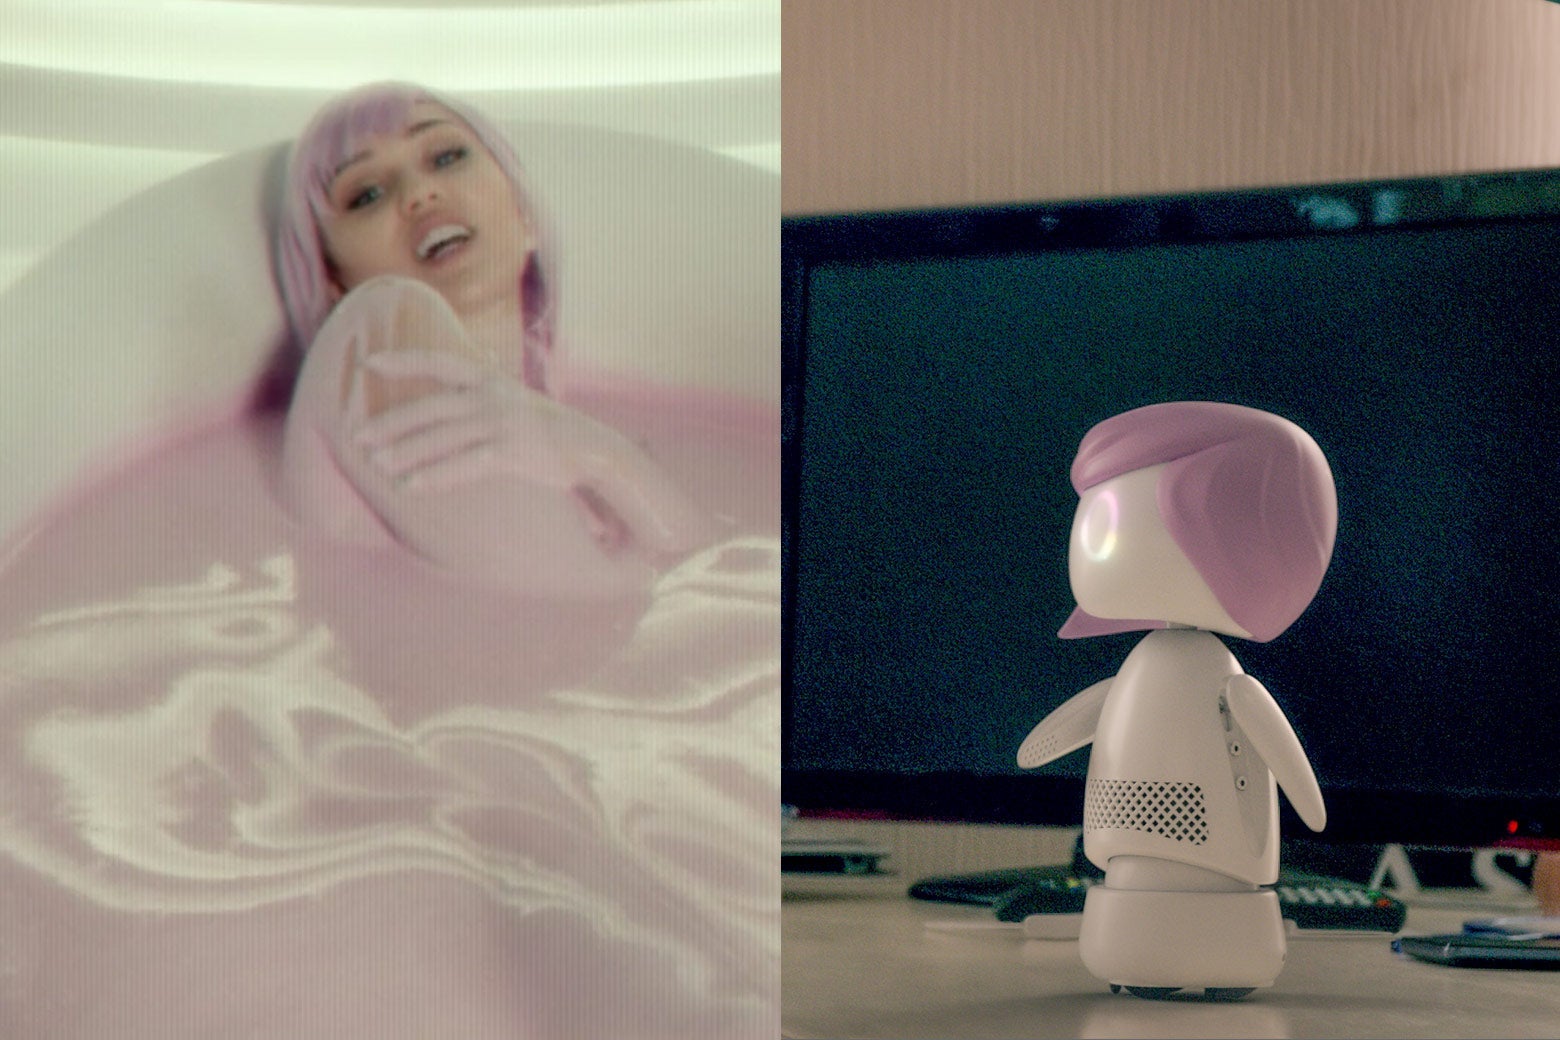 In this side-by-side still from Black Mirror, Miley Cyrus' character bathes in some pink milk bath. In the other image, the Ashley Too doll sits.